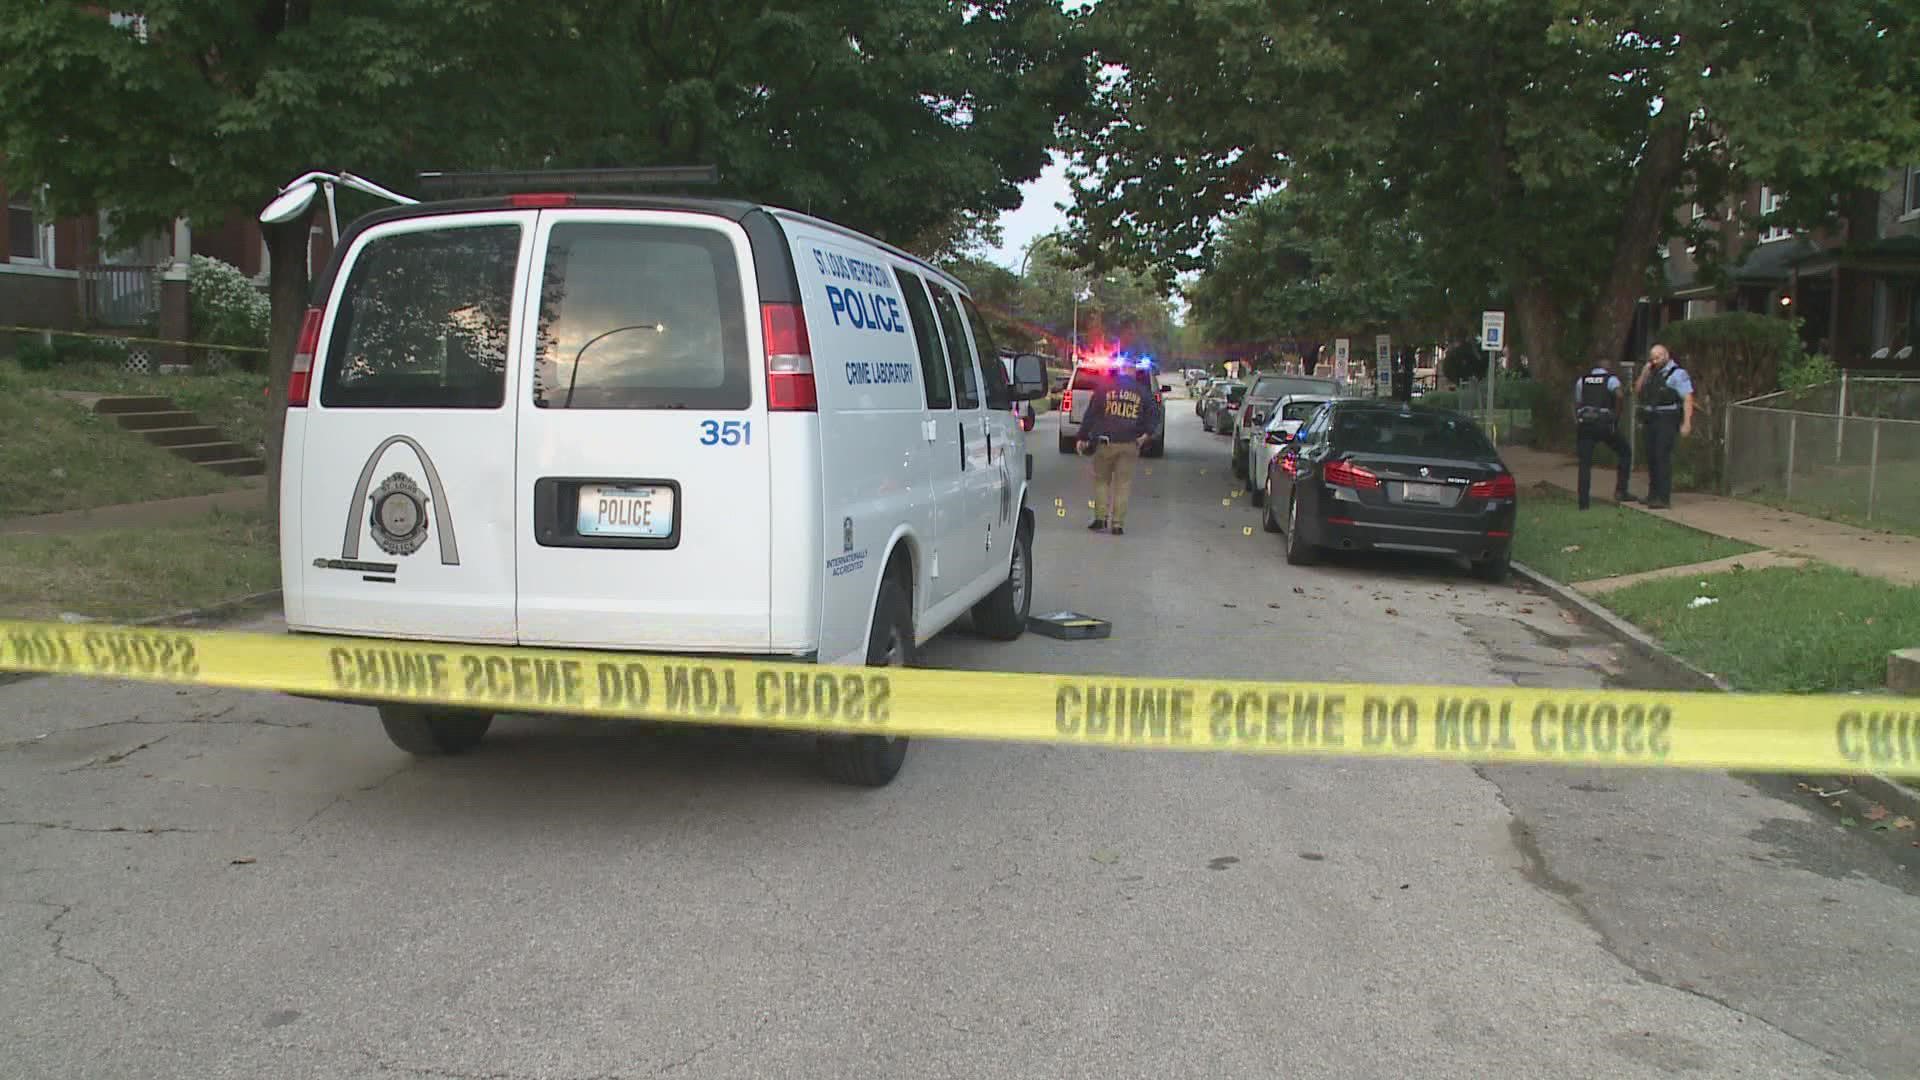 Four men were injured in a shooting just after 6 p.m. Monday evening. St. Louis police reported all four victims as stable.